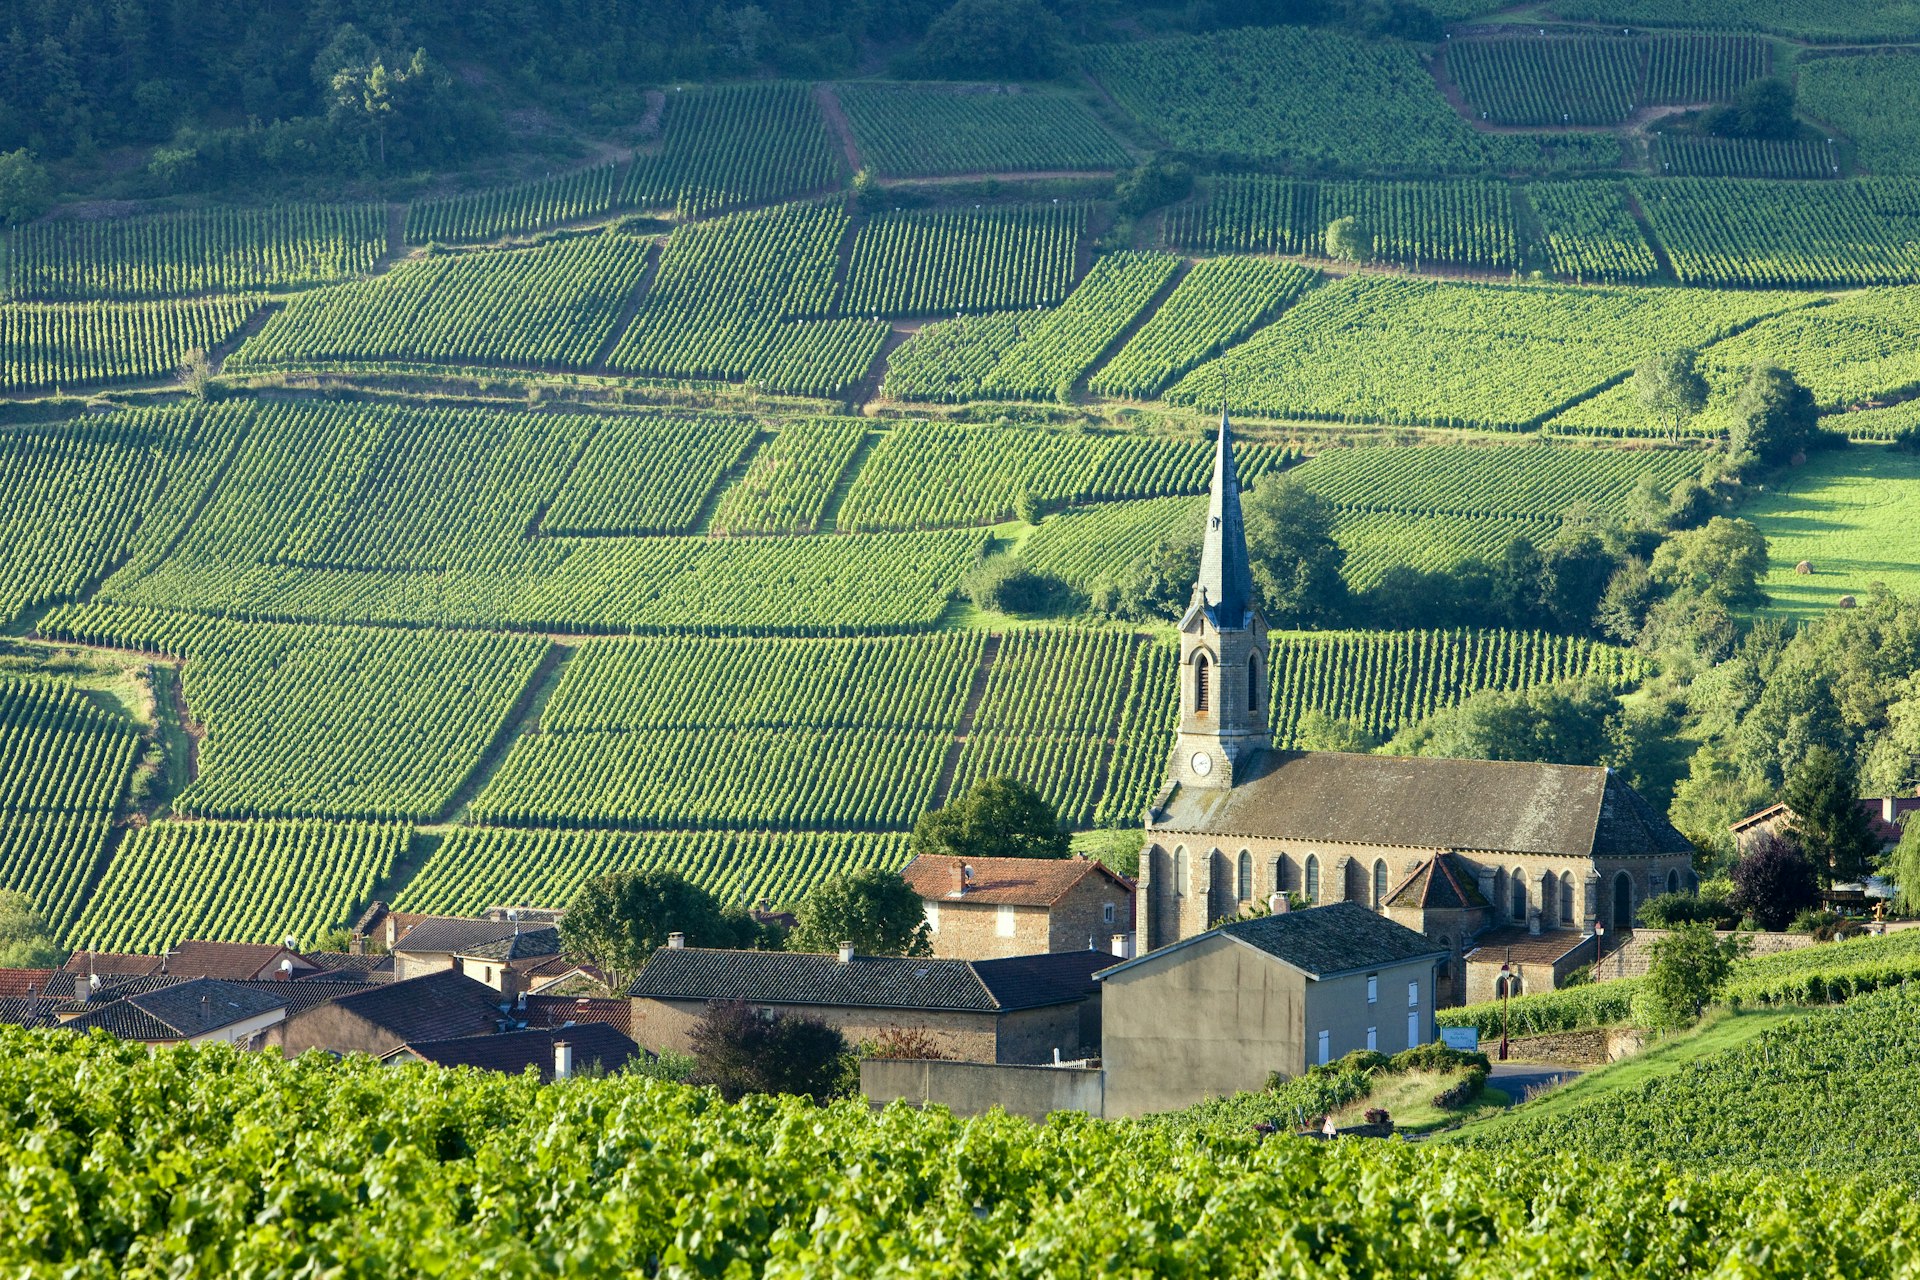 Vergisson village surrounded by vineyards in France 